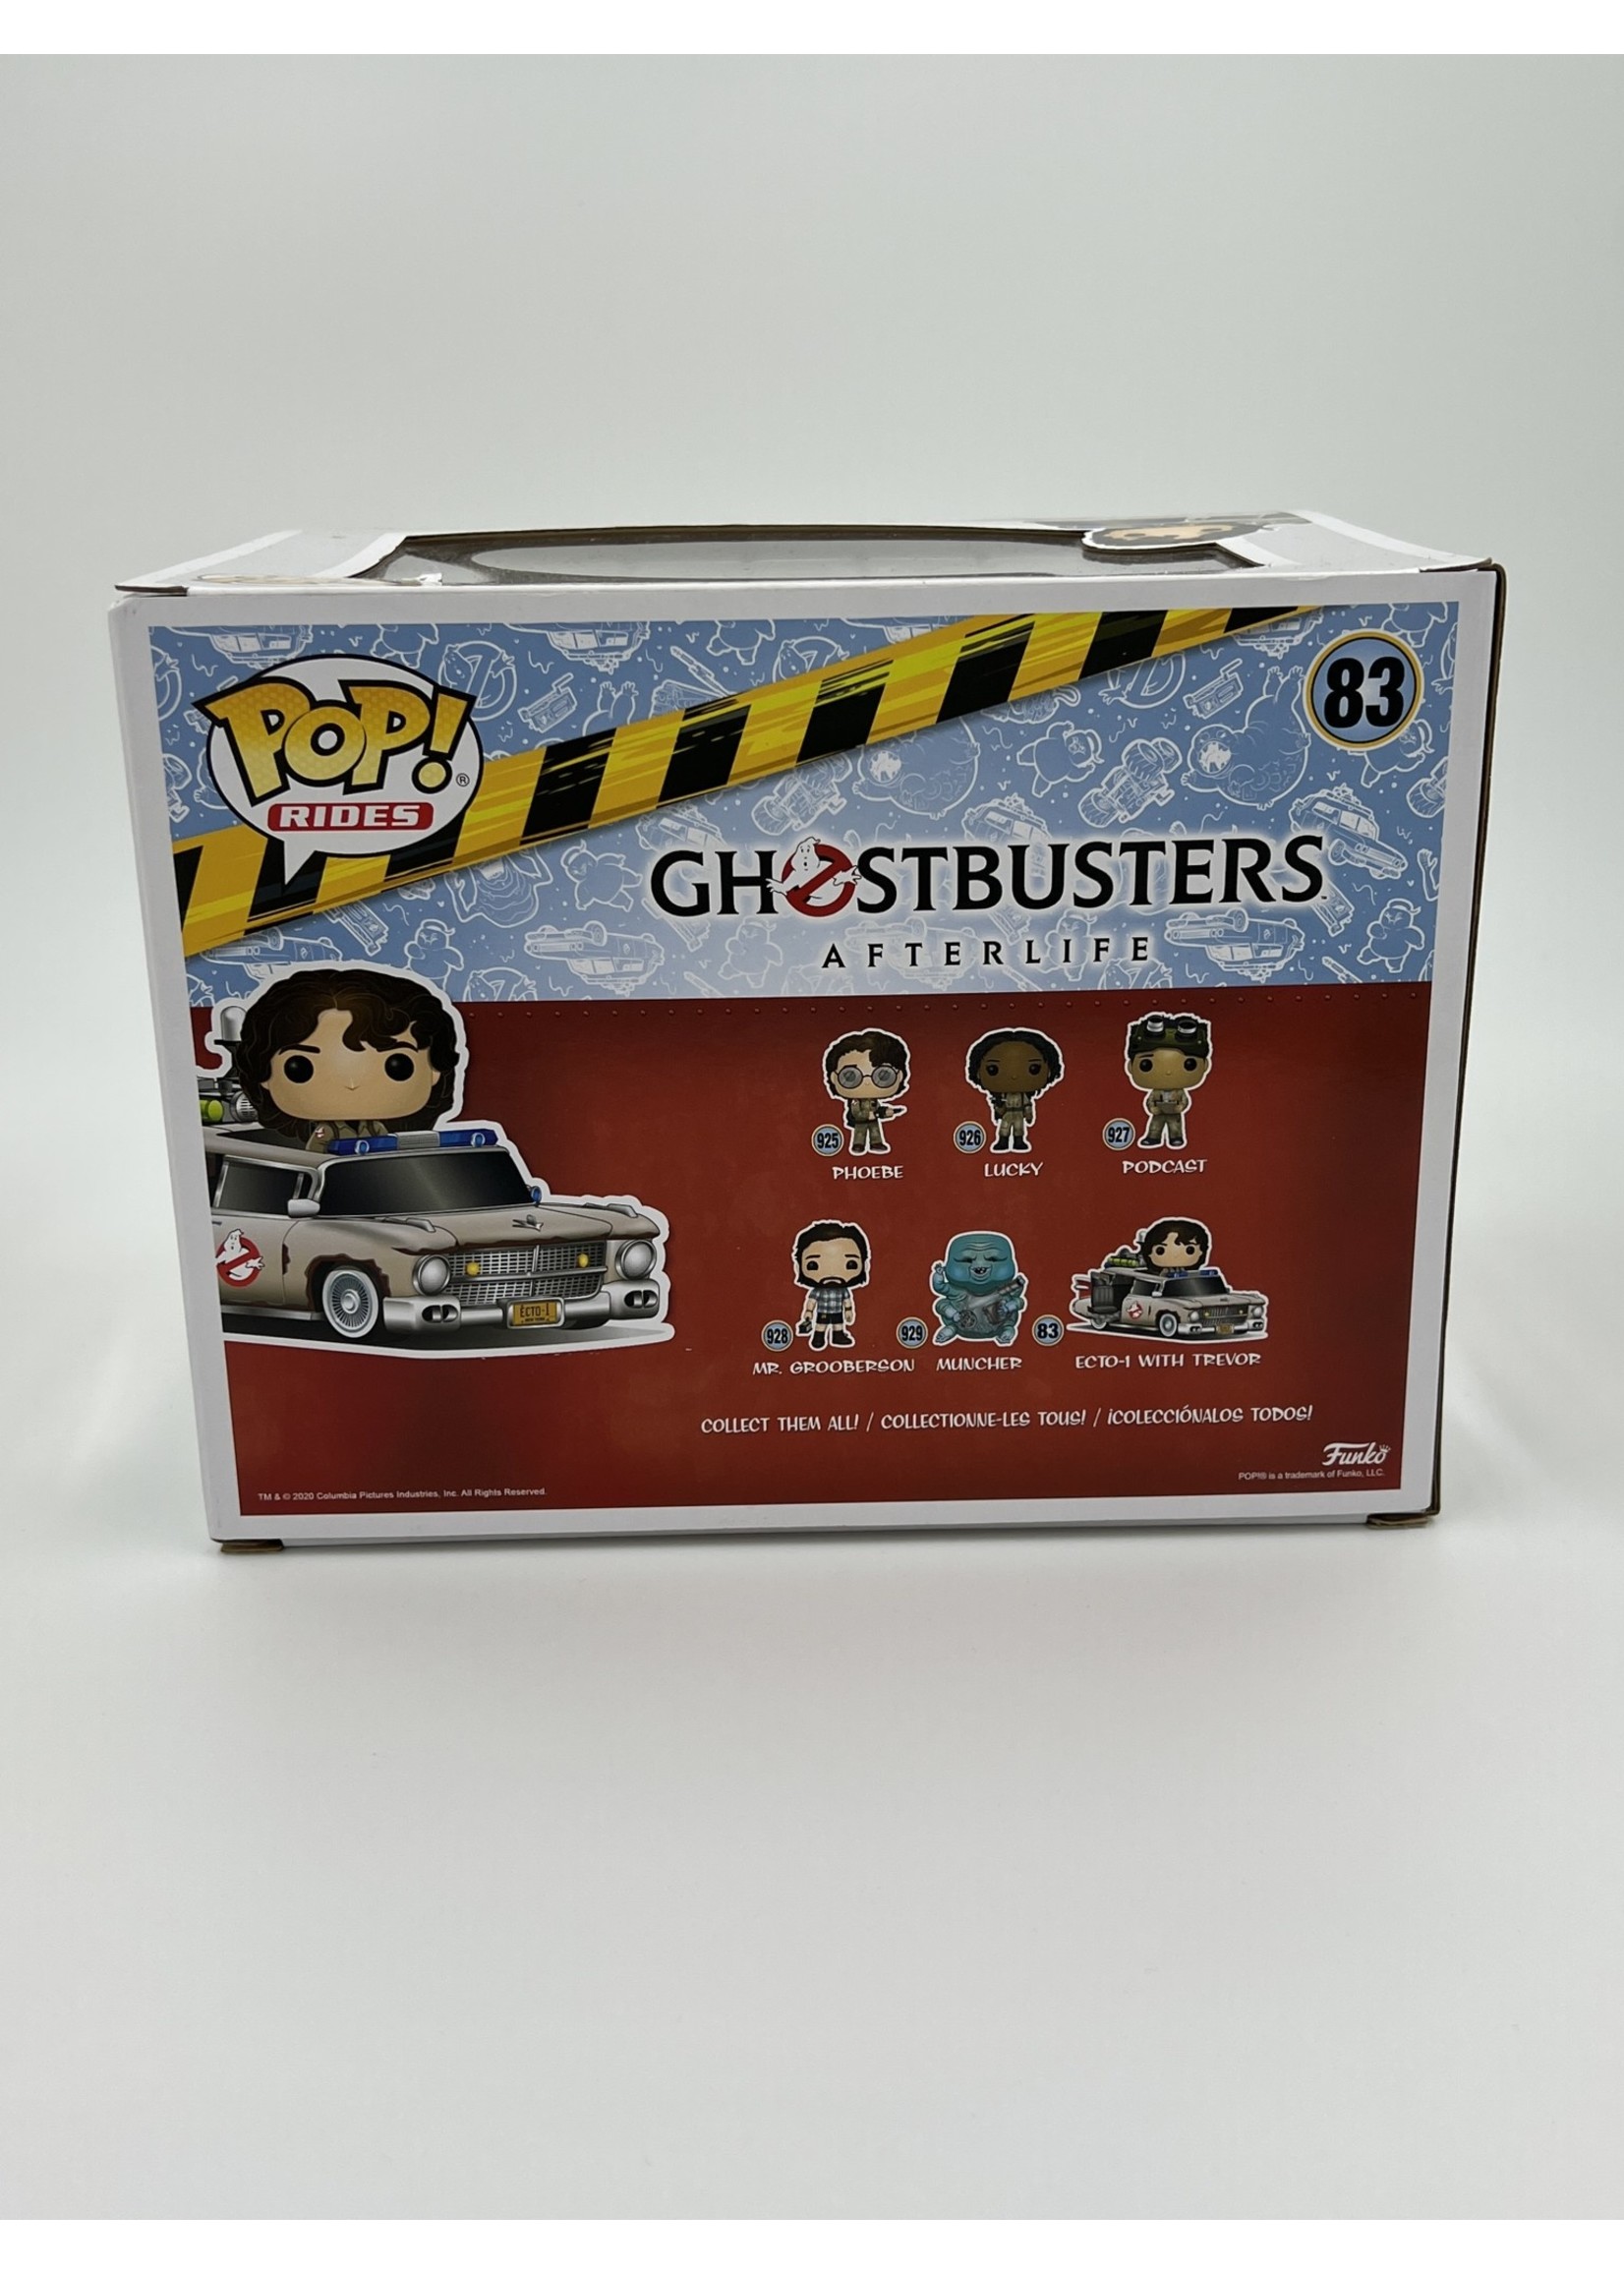 Action Figures Ecto 1 With Trevor Ghostbusters Afterlife Funko Pop Rides